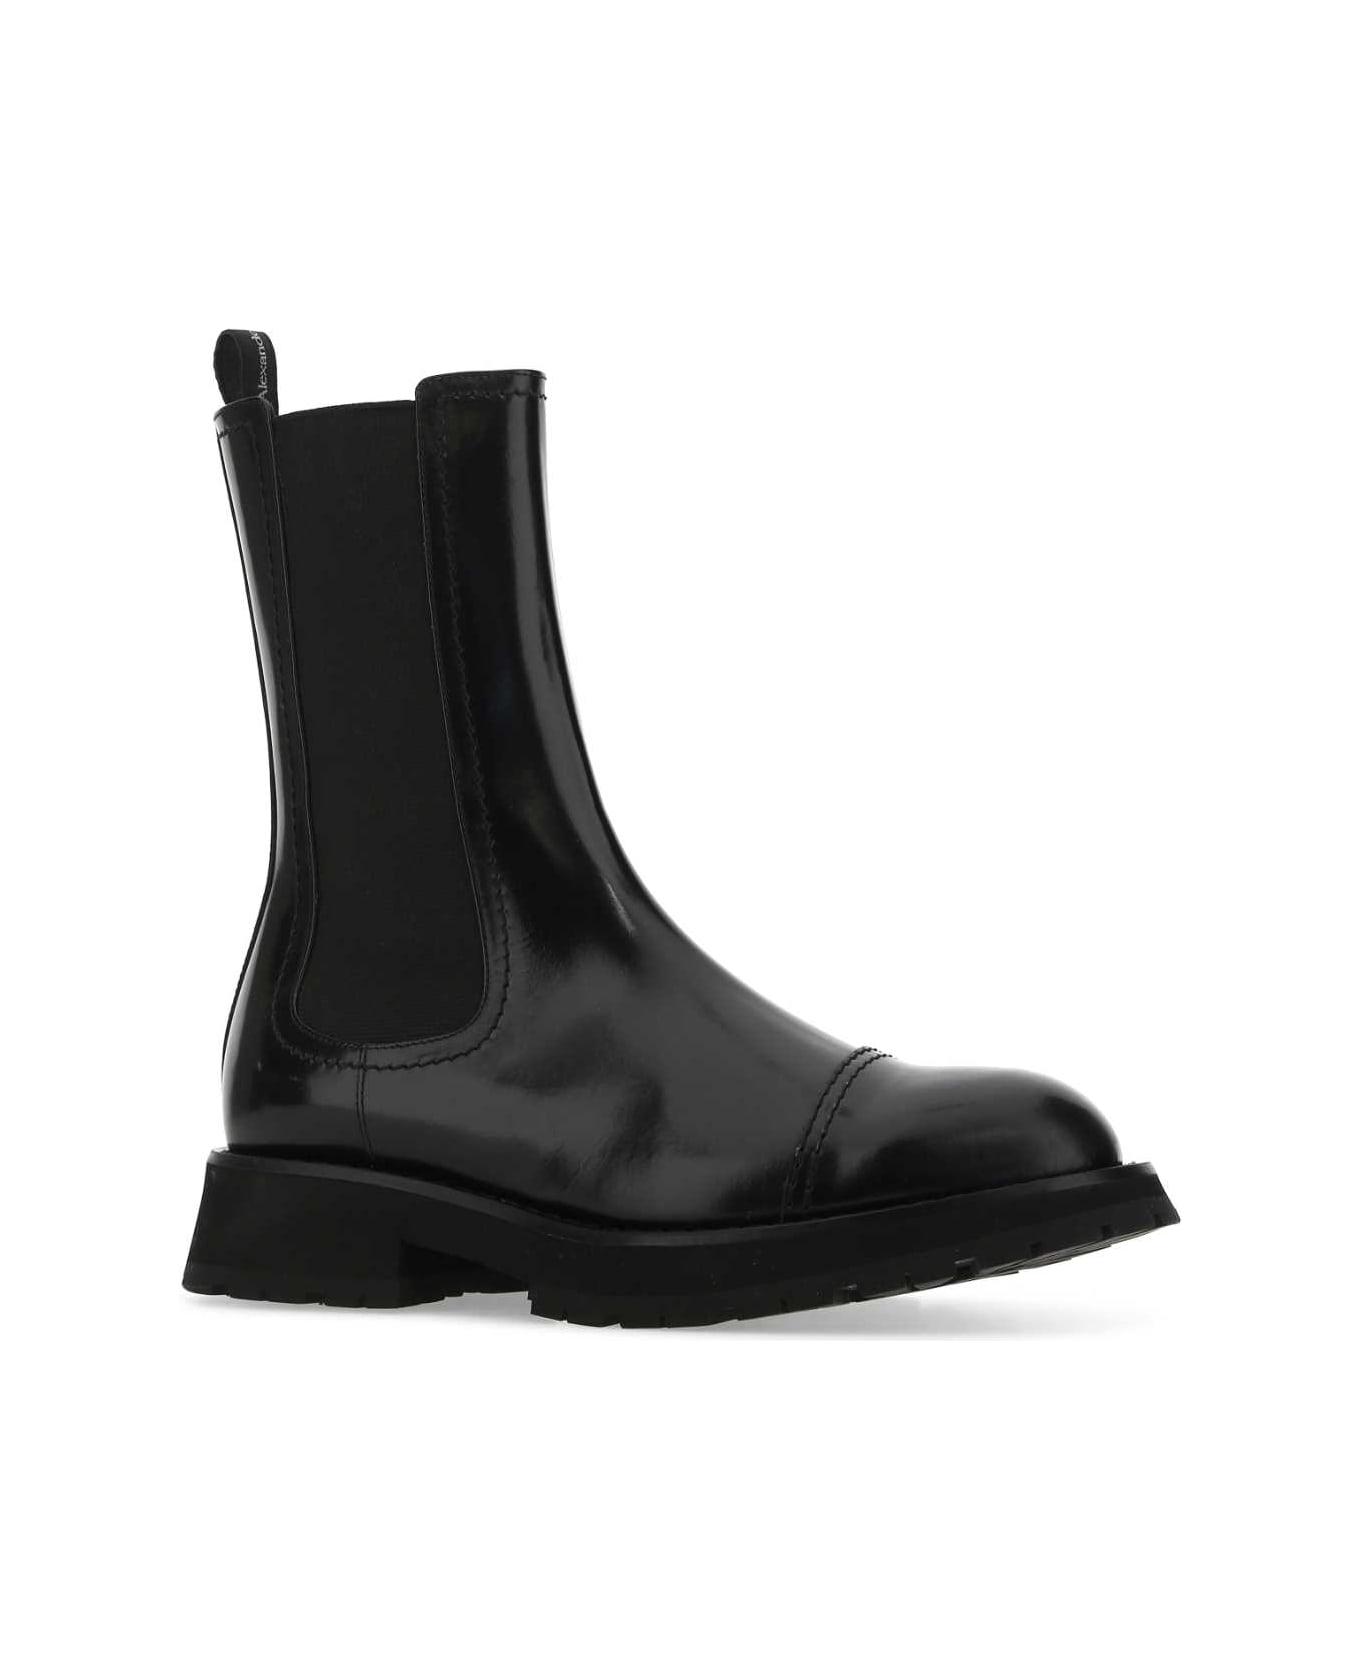 Alexander McQueen Black Leather Ankle Boots - 1000